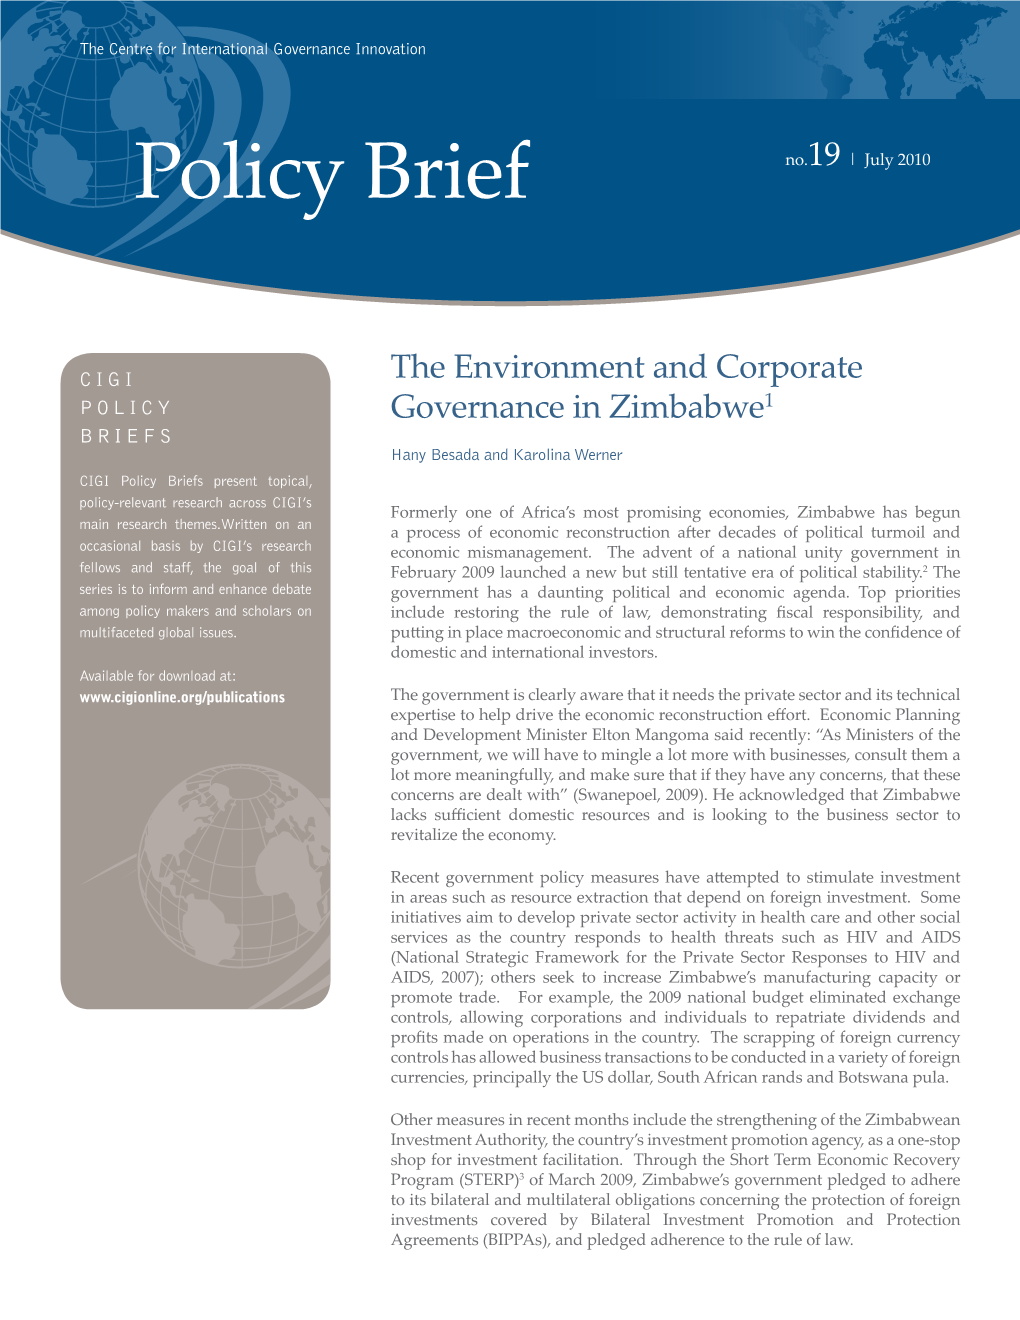 The Environment and Corporate Governance in Zimbabwe